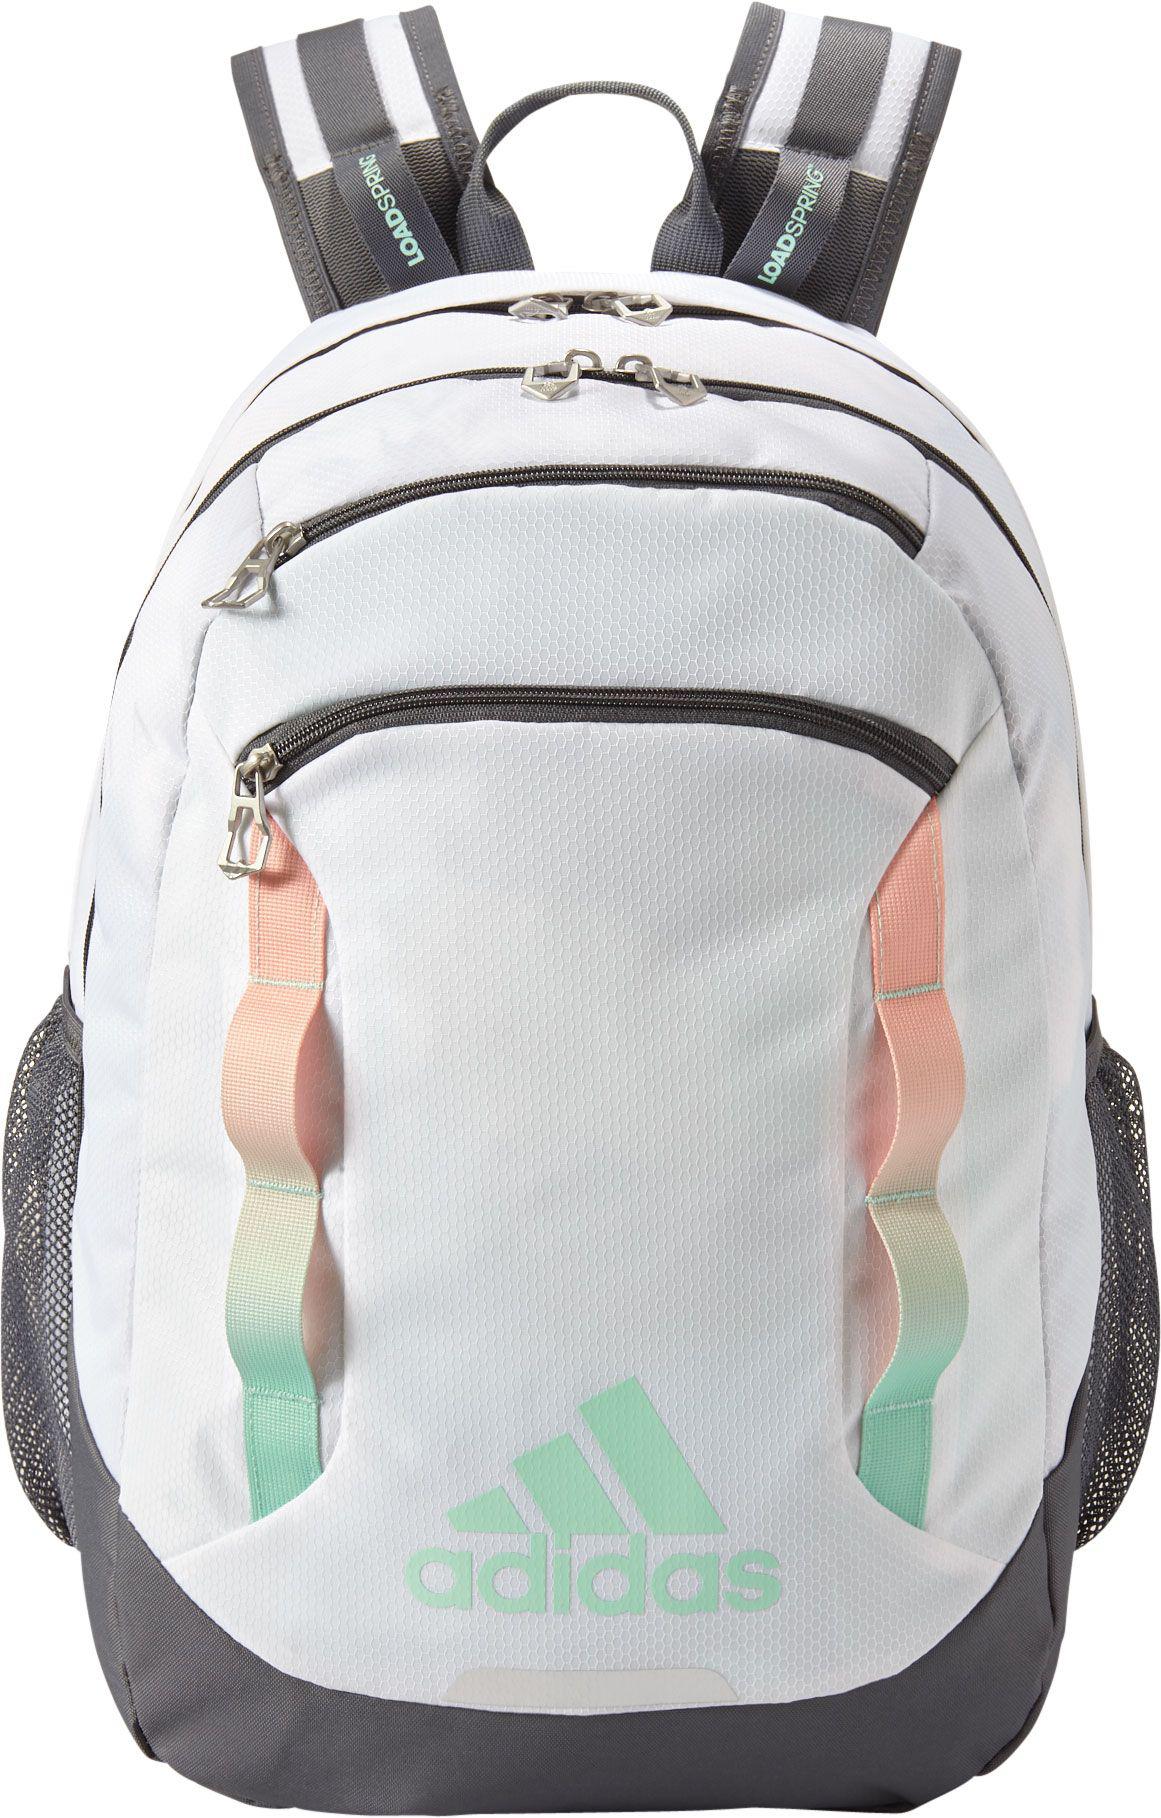 adidas Synthetic Rival Xl Backpack in 